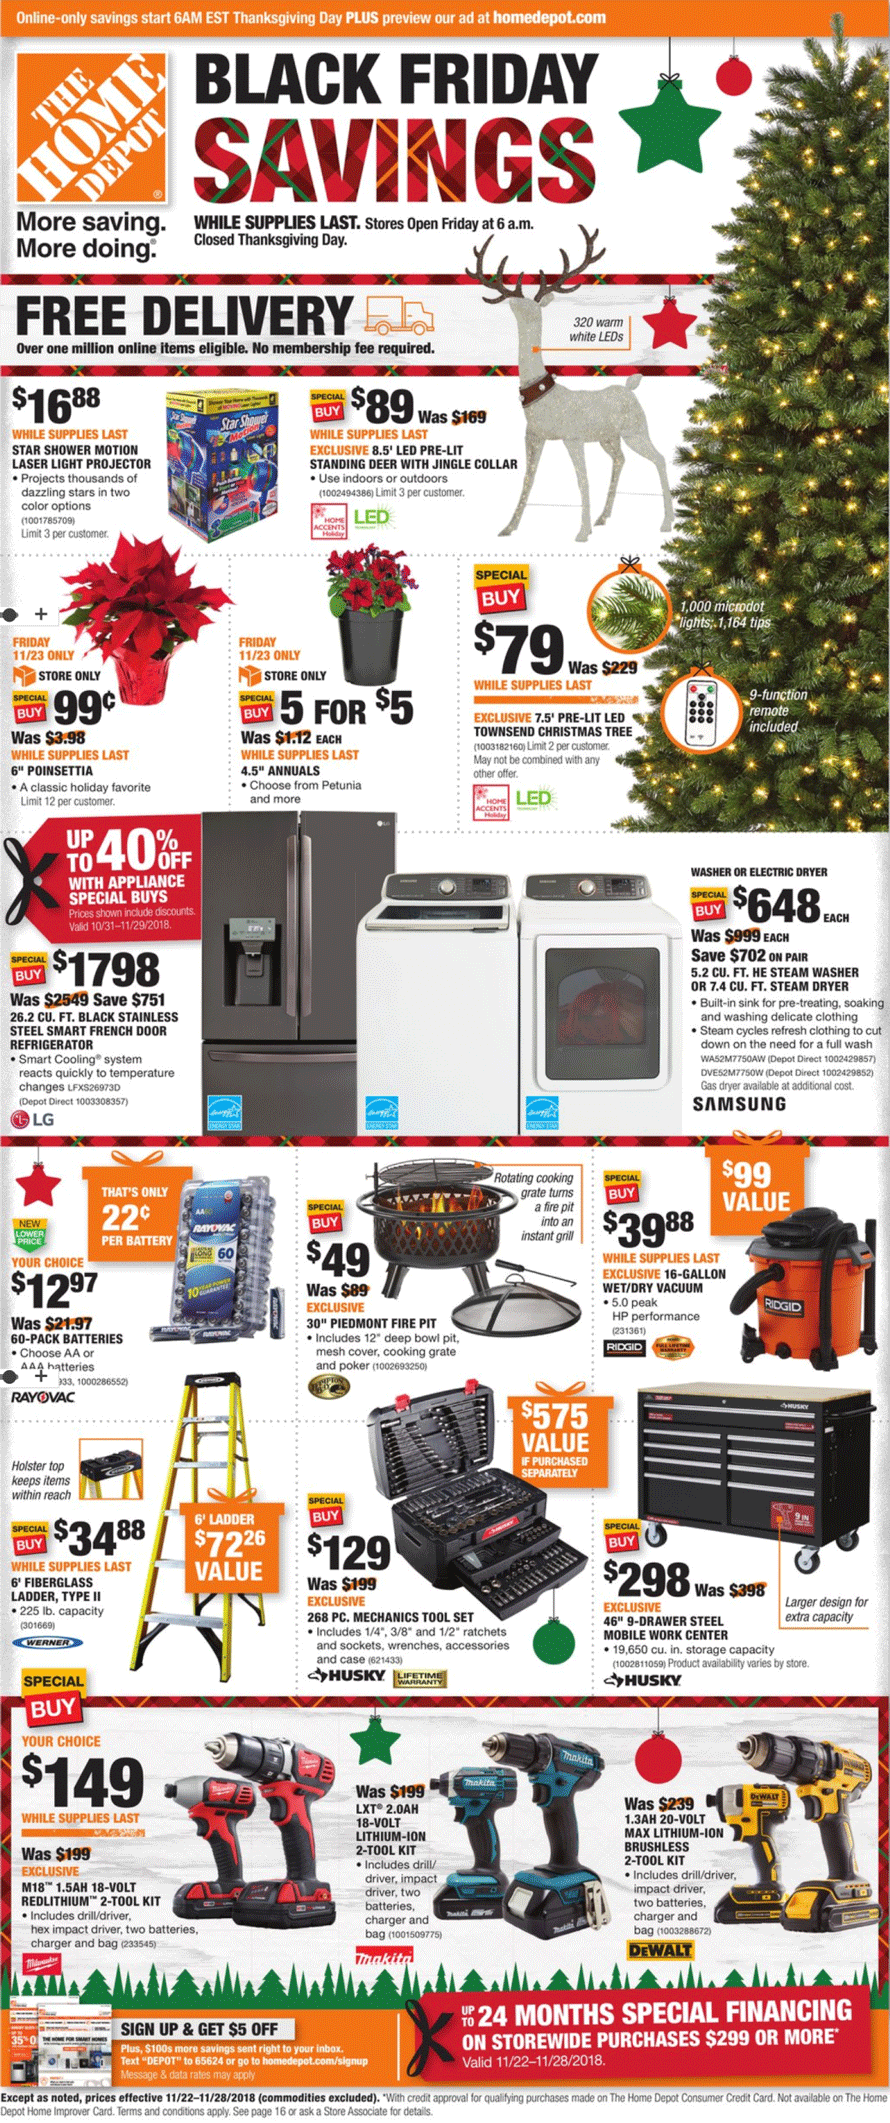 Home Depot Black Friday 2018 Ad, Deals and Sales - 0